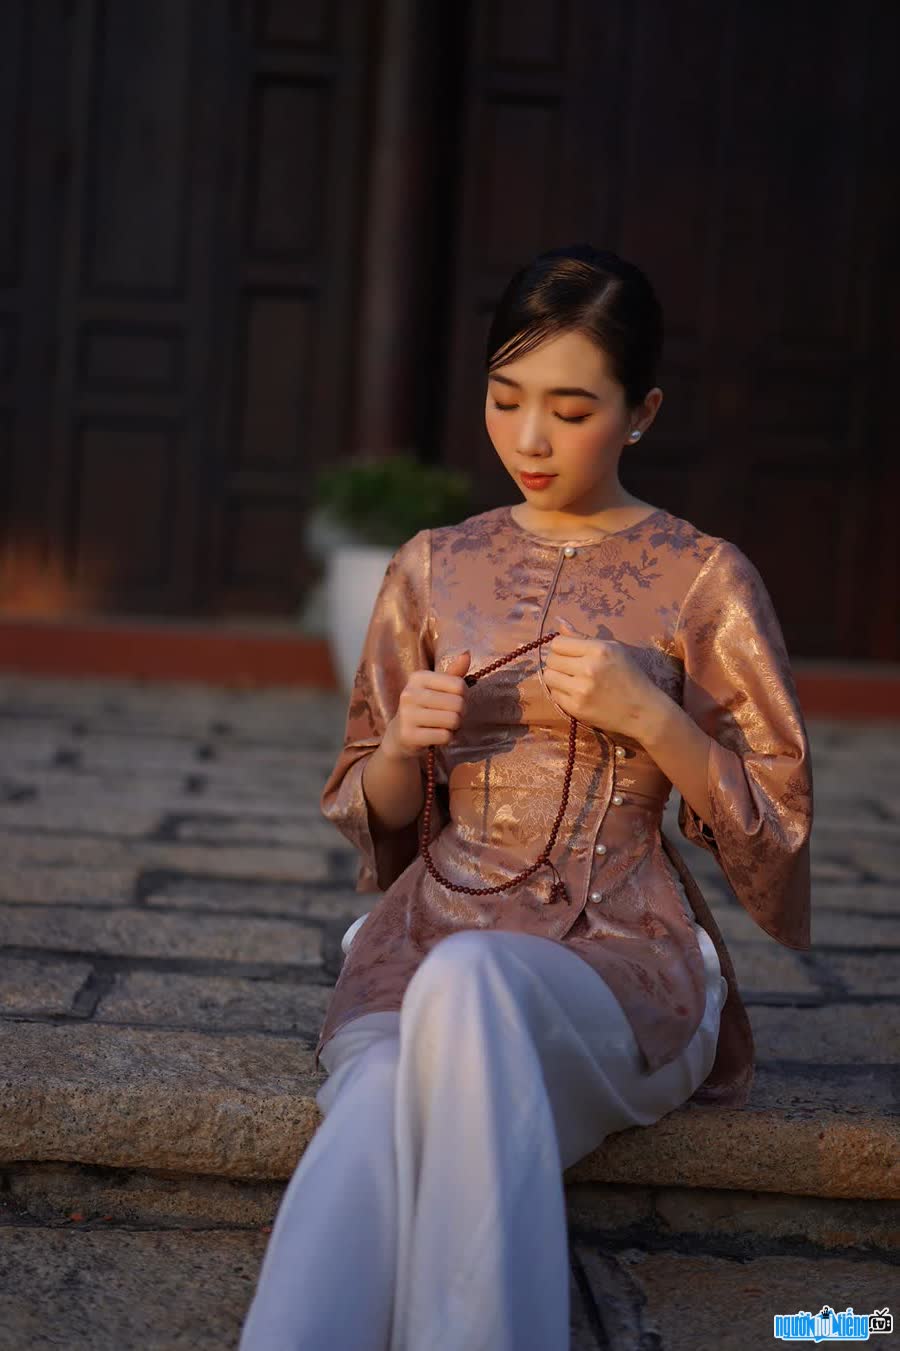  The pure beauty of Xinh Lan in an antique dress